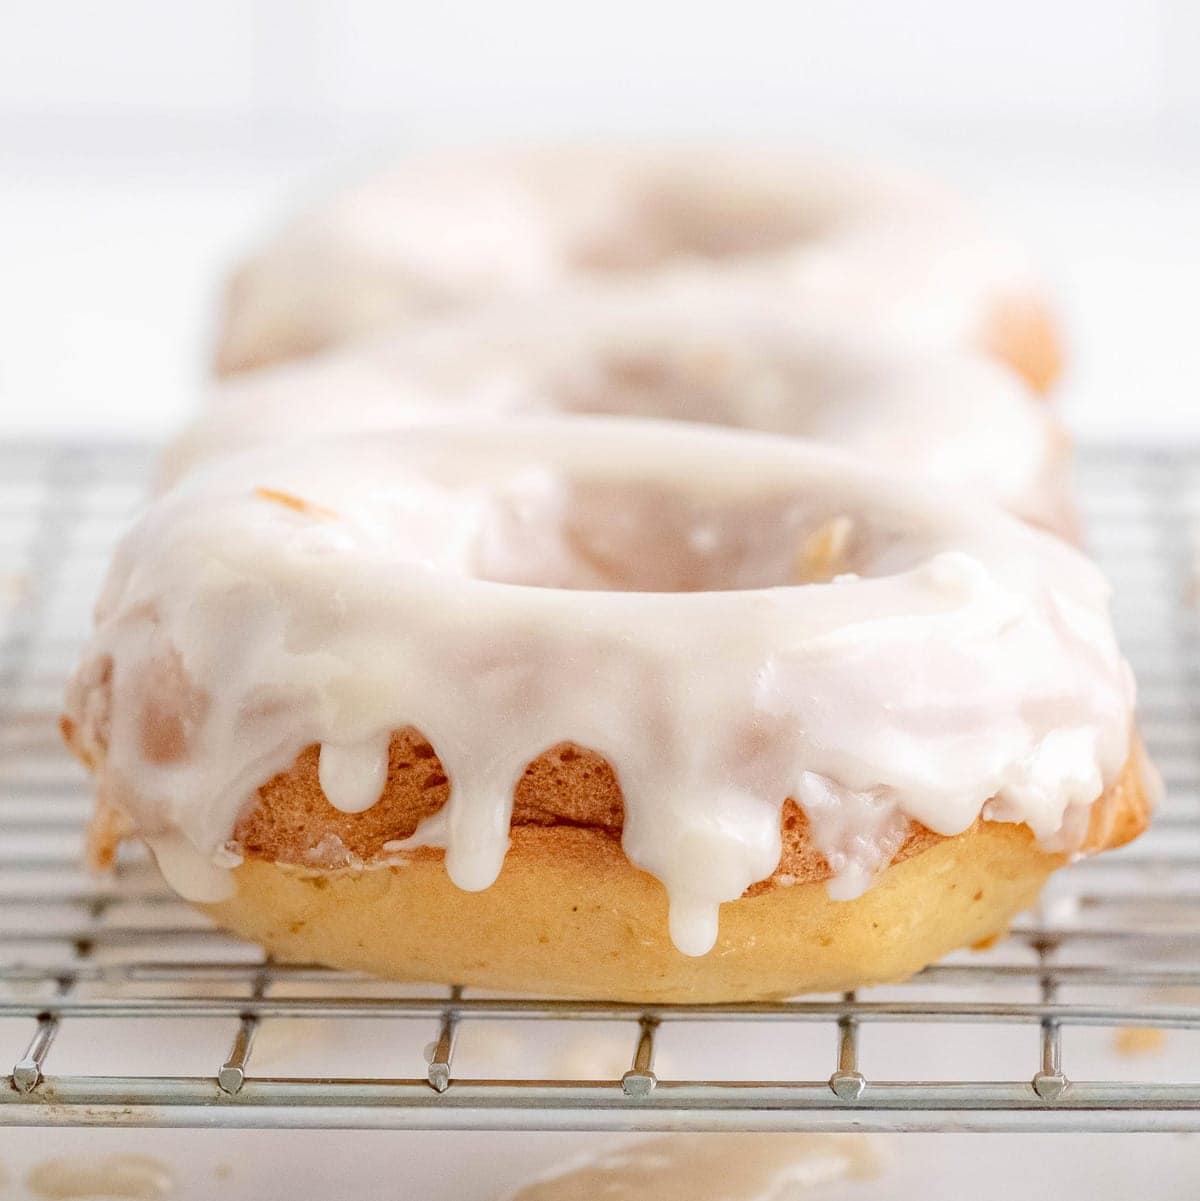 Vanilla Icing For Donuts: A Quick & Easy Glaze For Desserts!